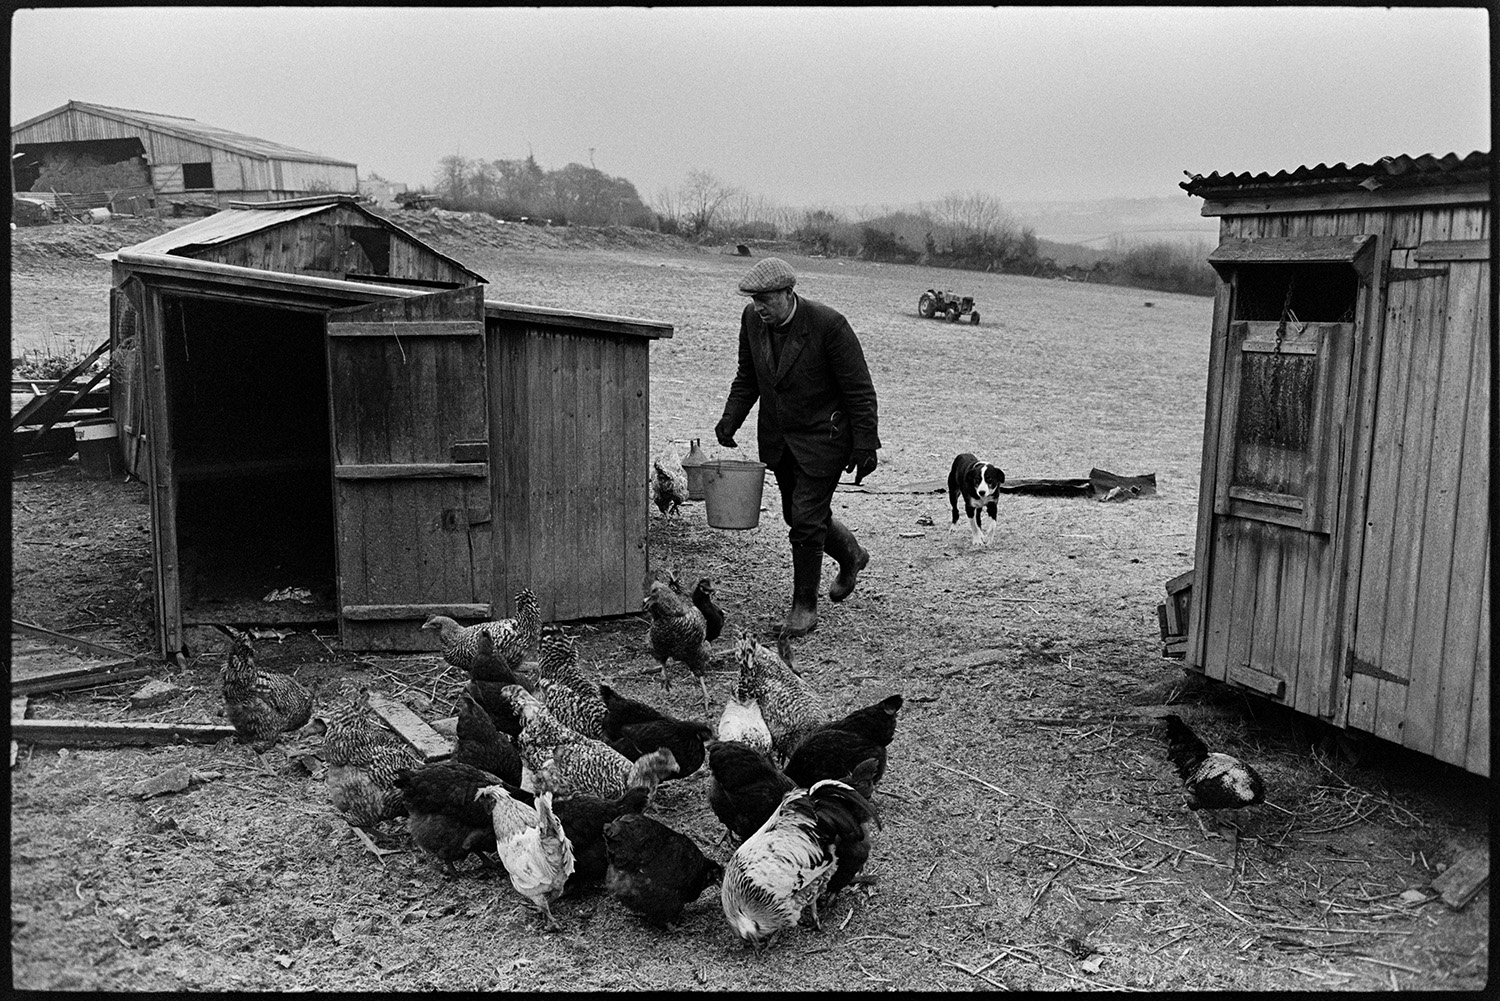 Farmer feeding chickens, frosty morning, chicken coup. 
[George Ayre feeding chickens in a field at Ashwell, Dolton on a frosty morning. A dog is with him. Wooden chicken coops can be seen in the field, as well as a barn and tractor in the background.]